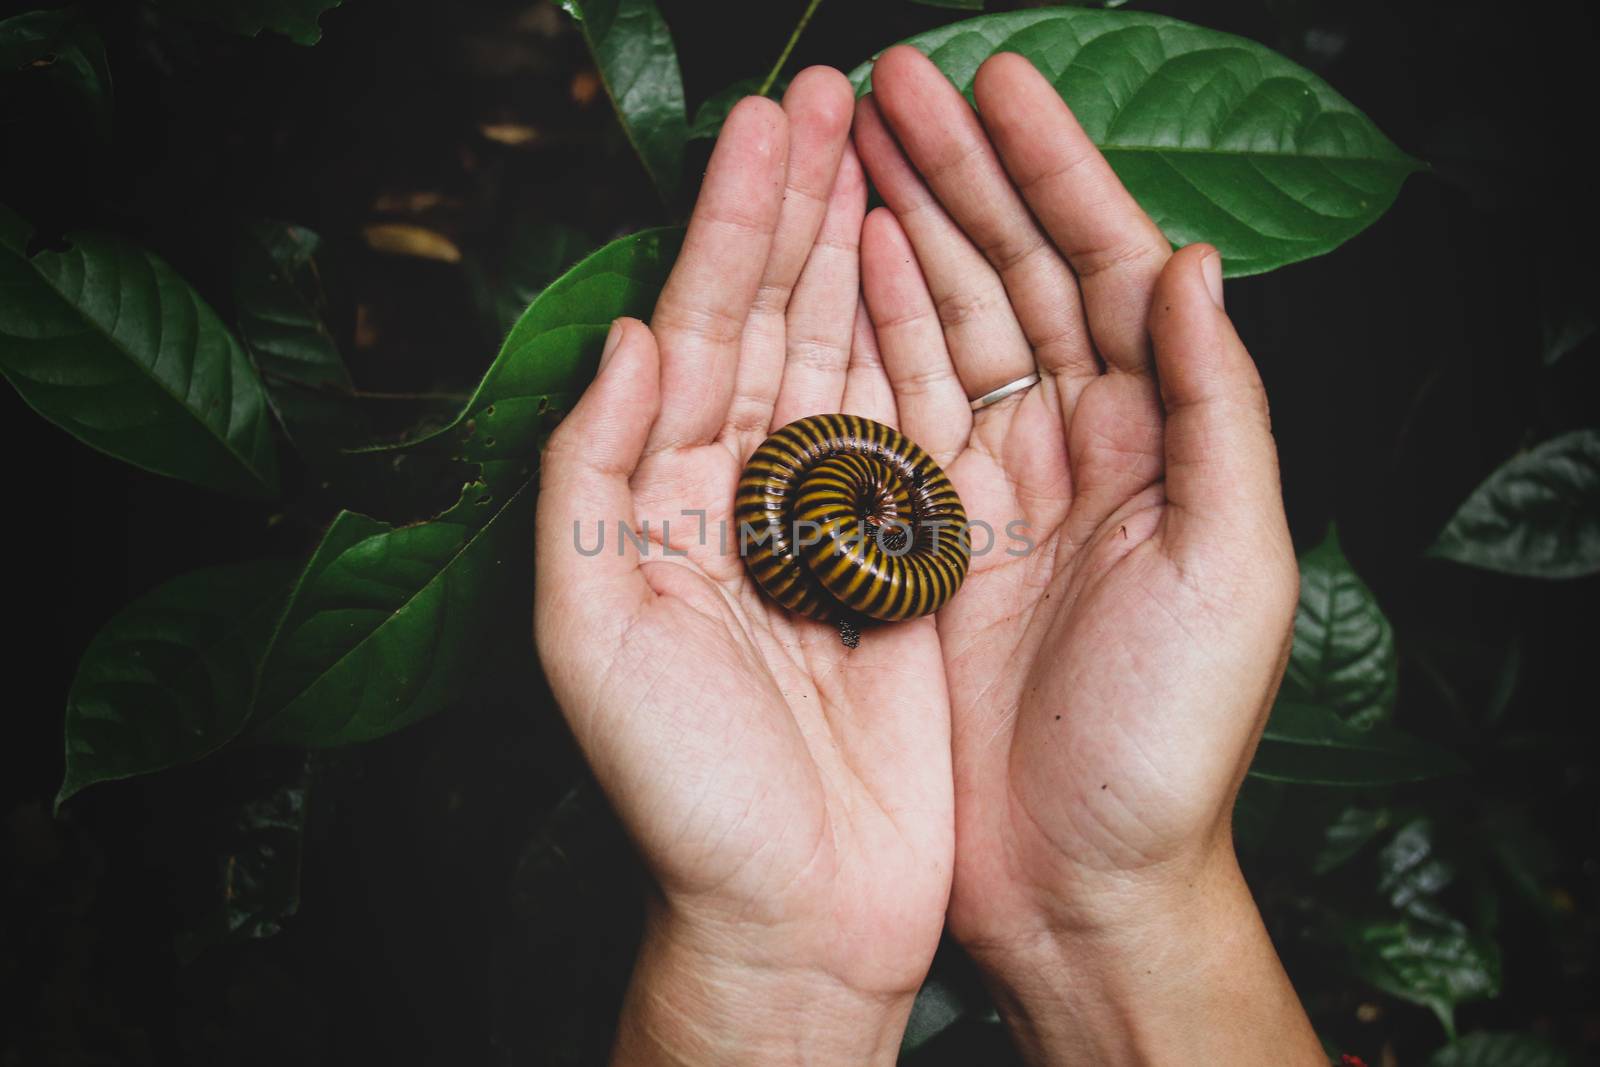 Holding a Asian giant millipede or Thyropygus spirobolinae sp, showing concept of kindness, harmony with nature and environmentalism